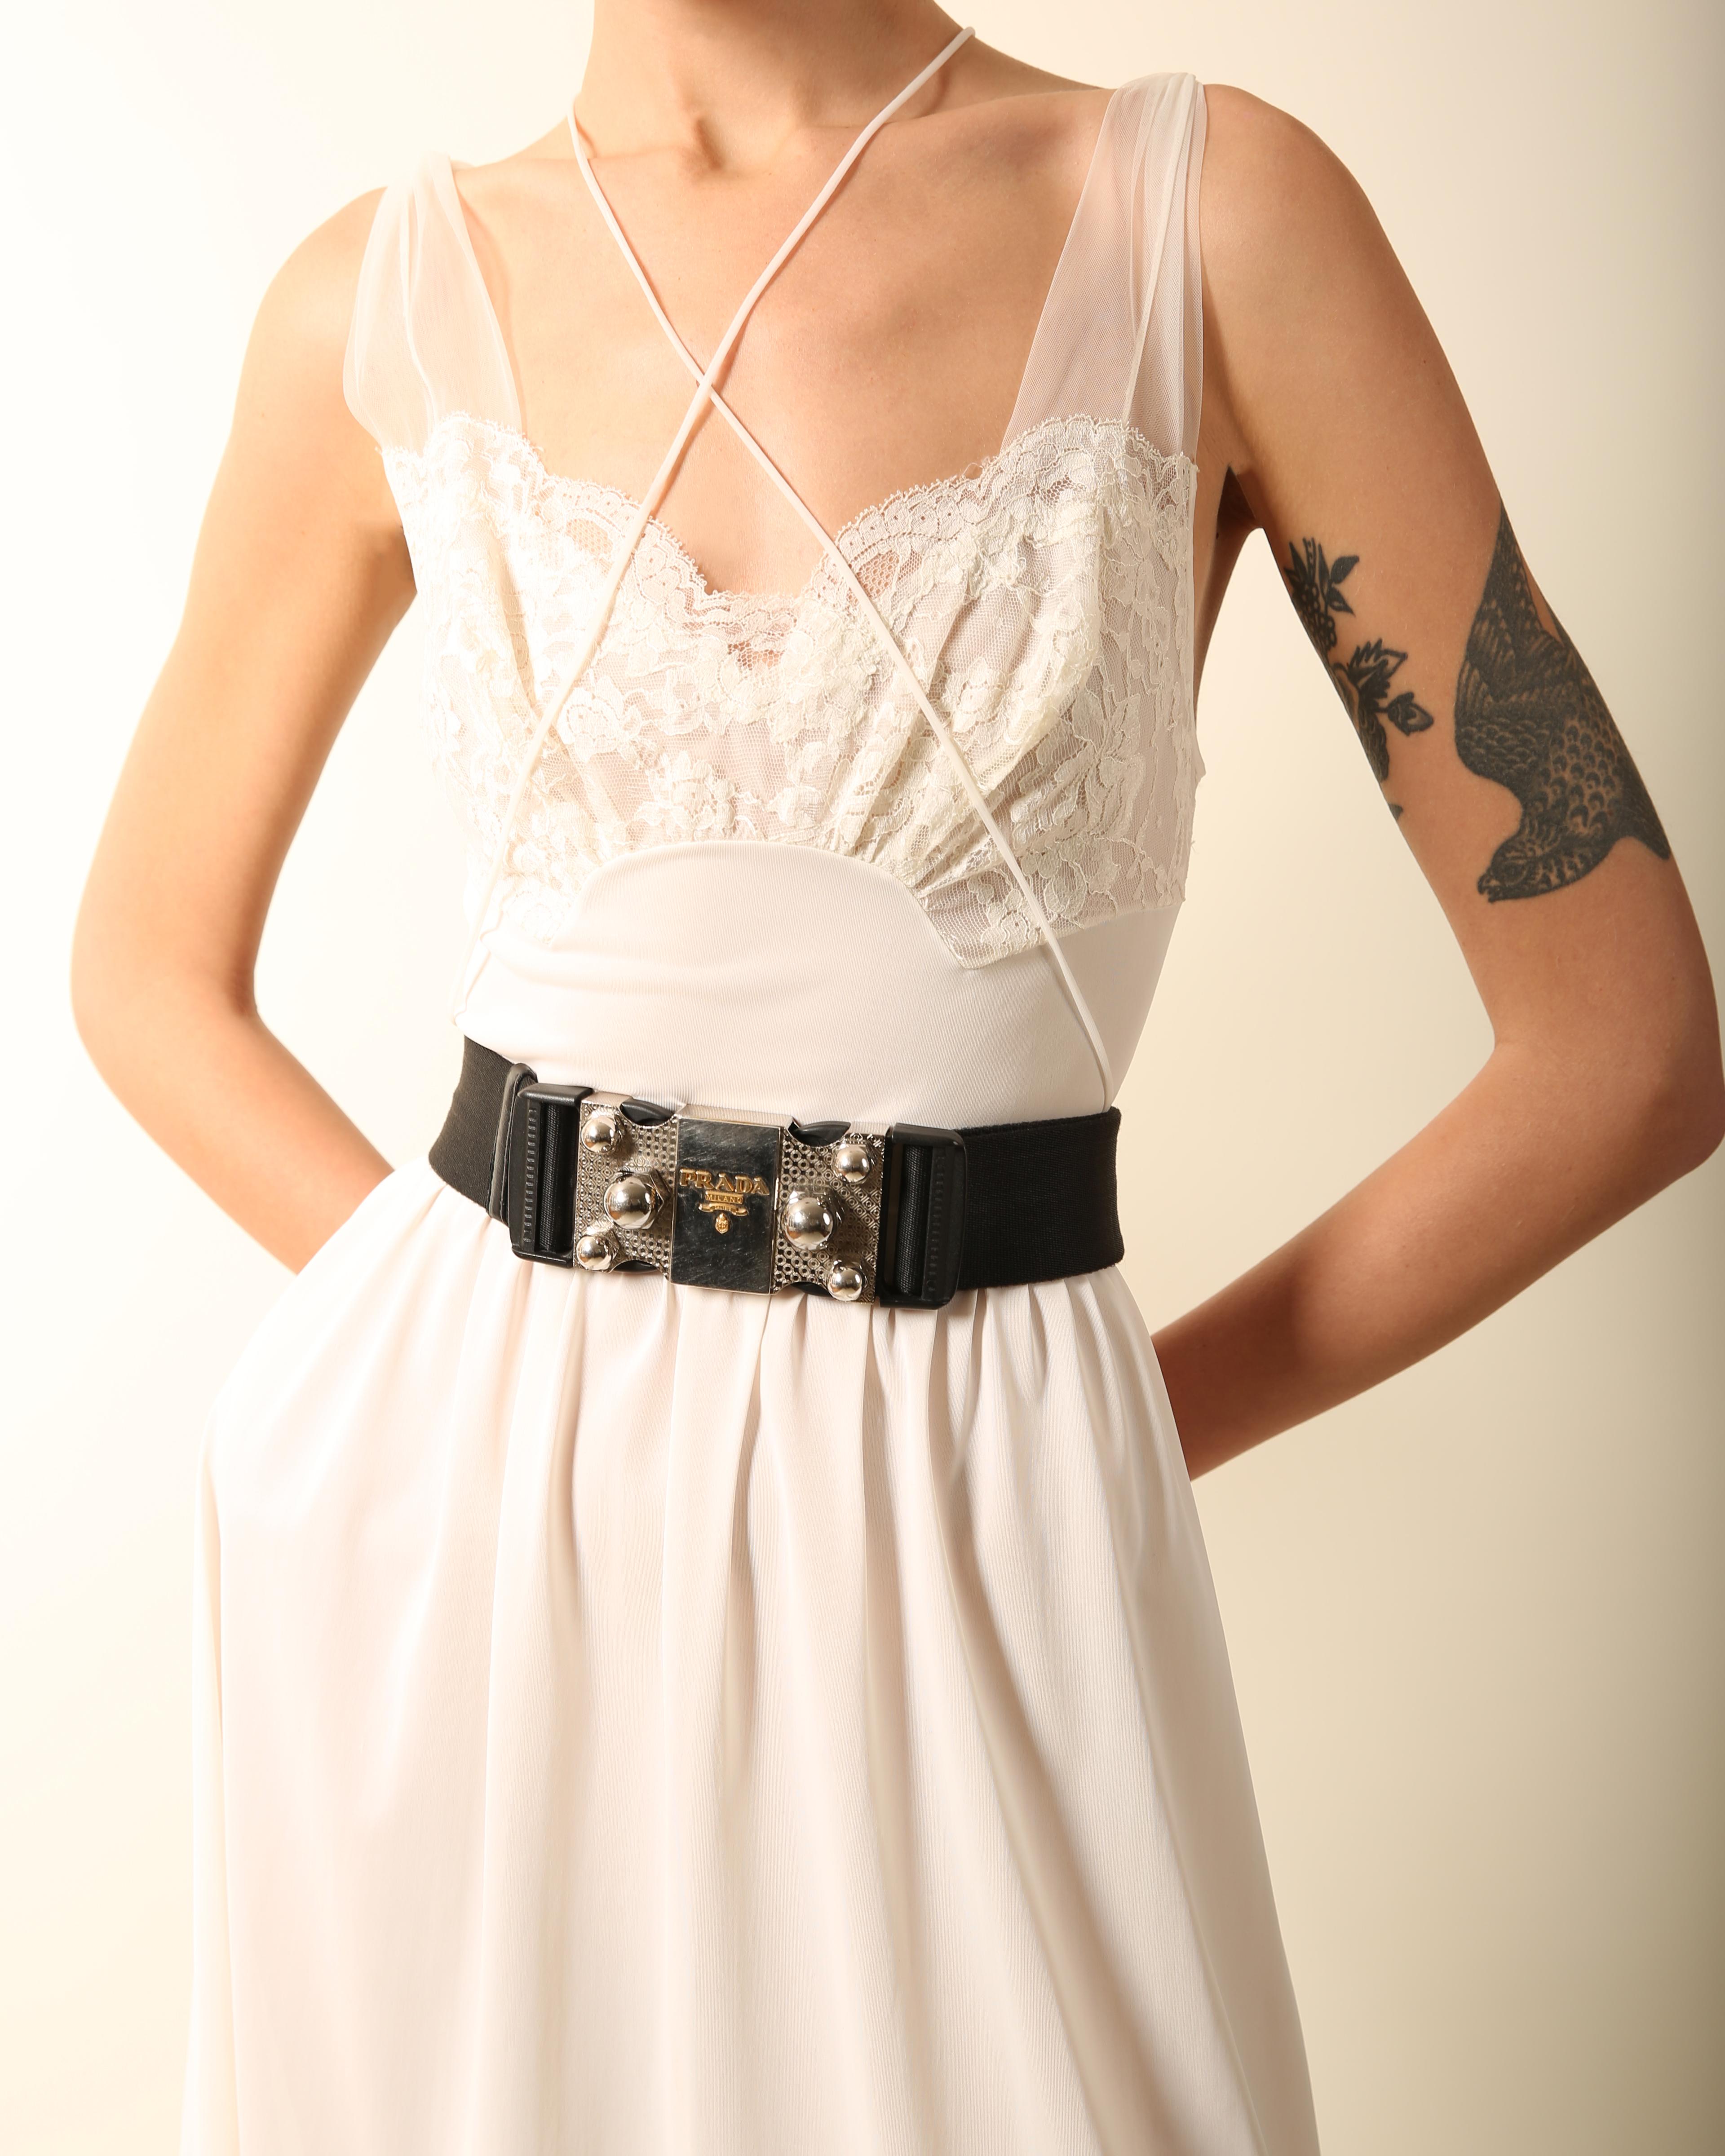 Vintage sheer ivory white lace wedding style midi night gown slip robe dress For Sale 3